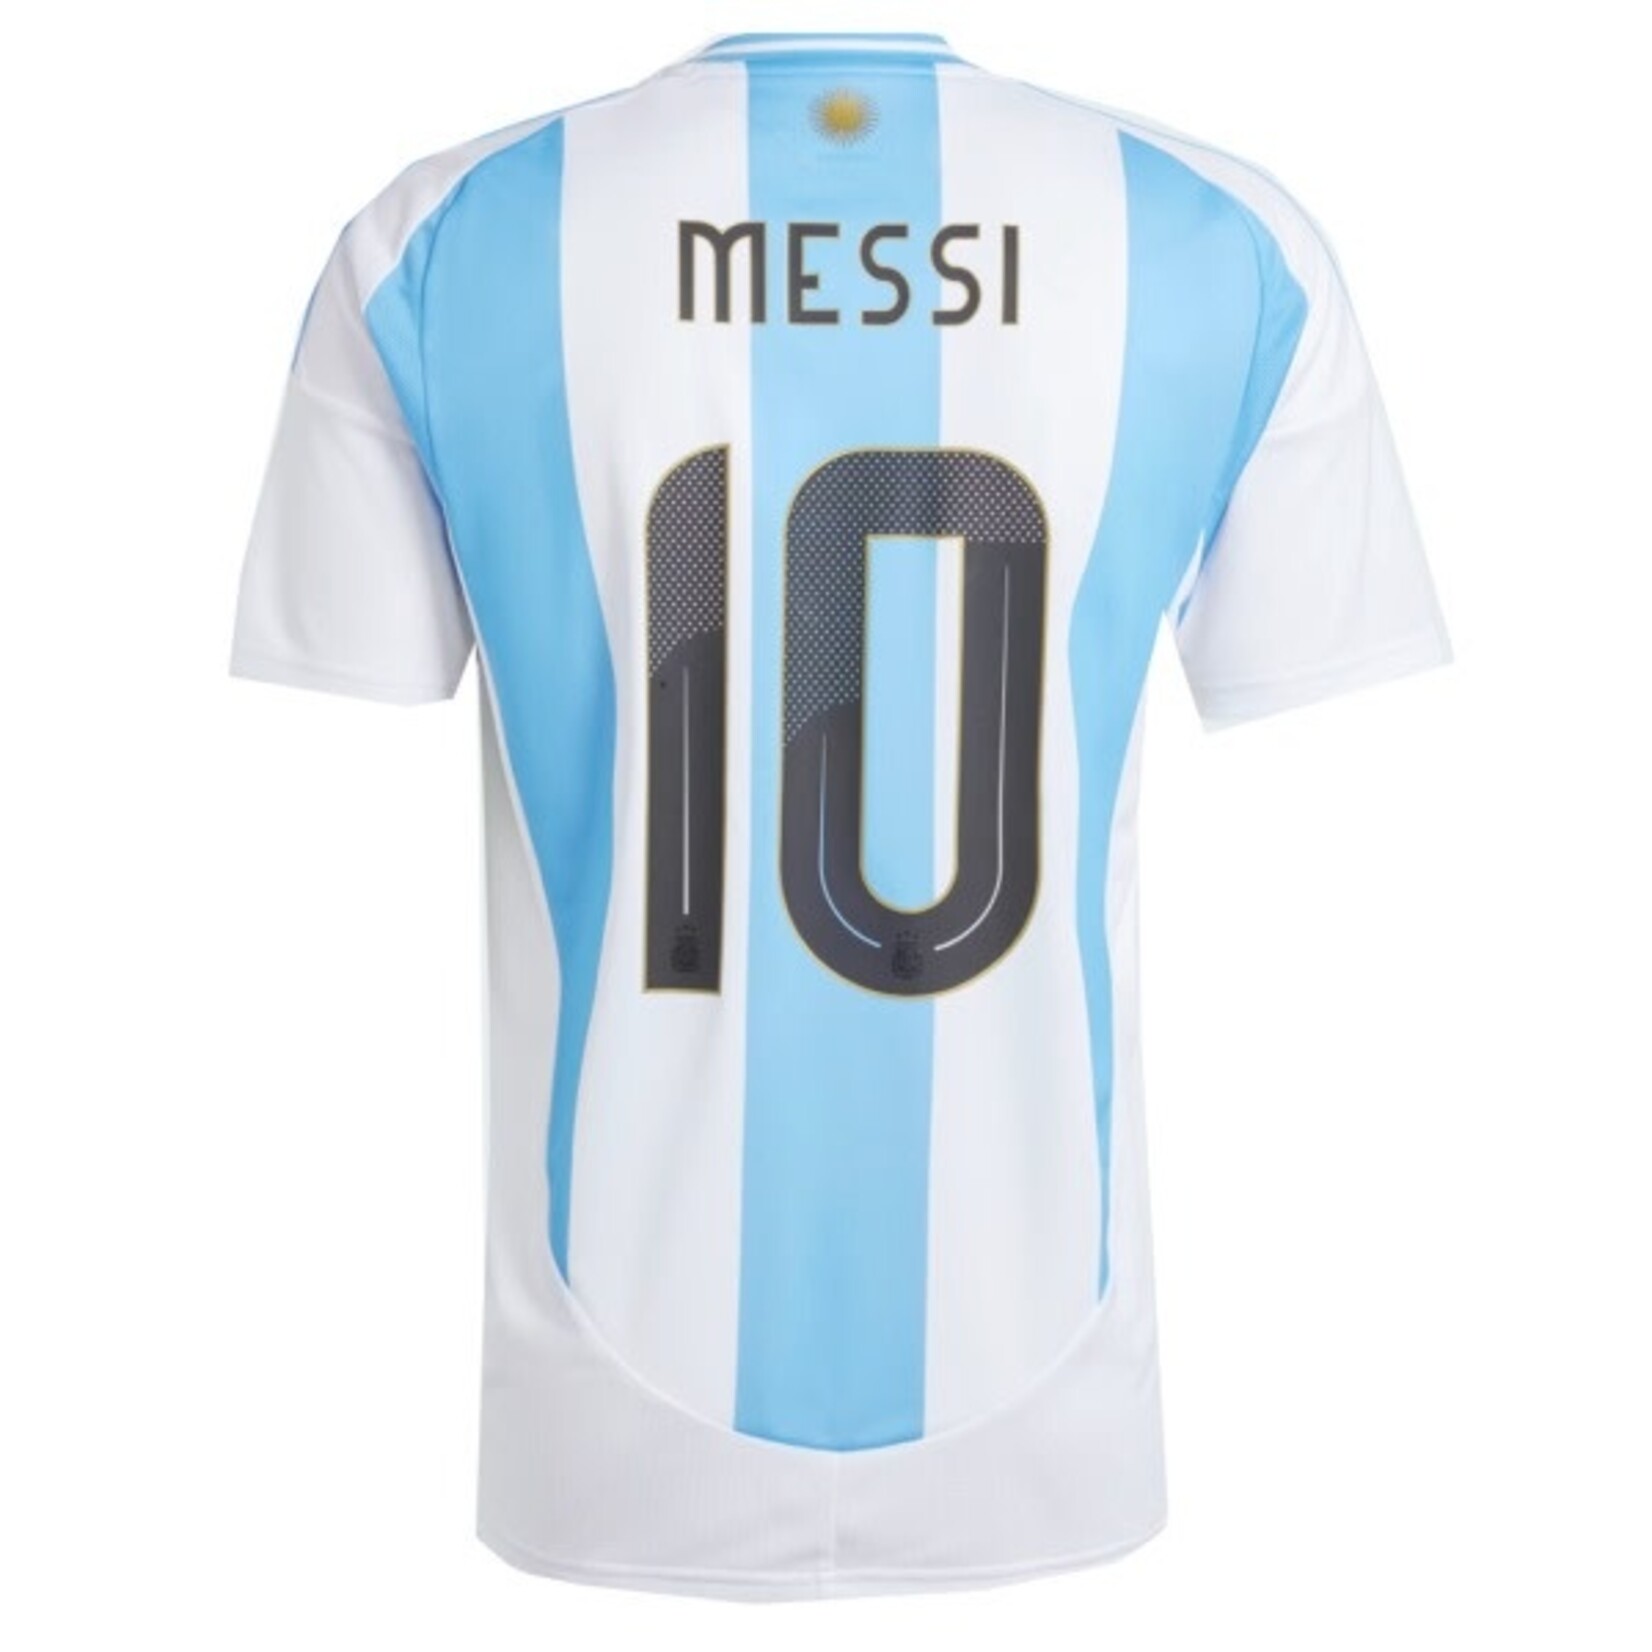 Adidas Argentina Youth 24/25 Messi Home Jersey IX7794